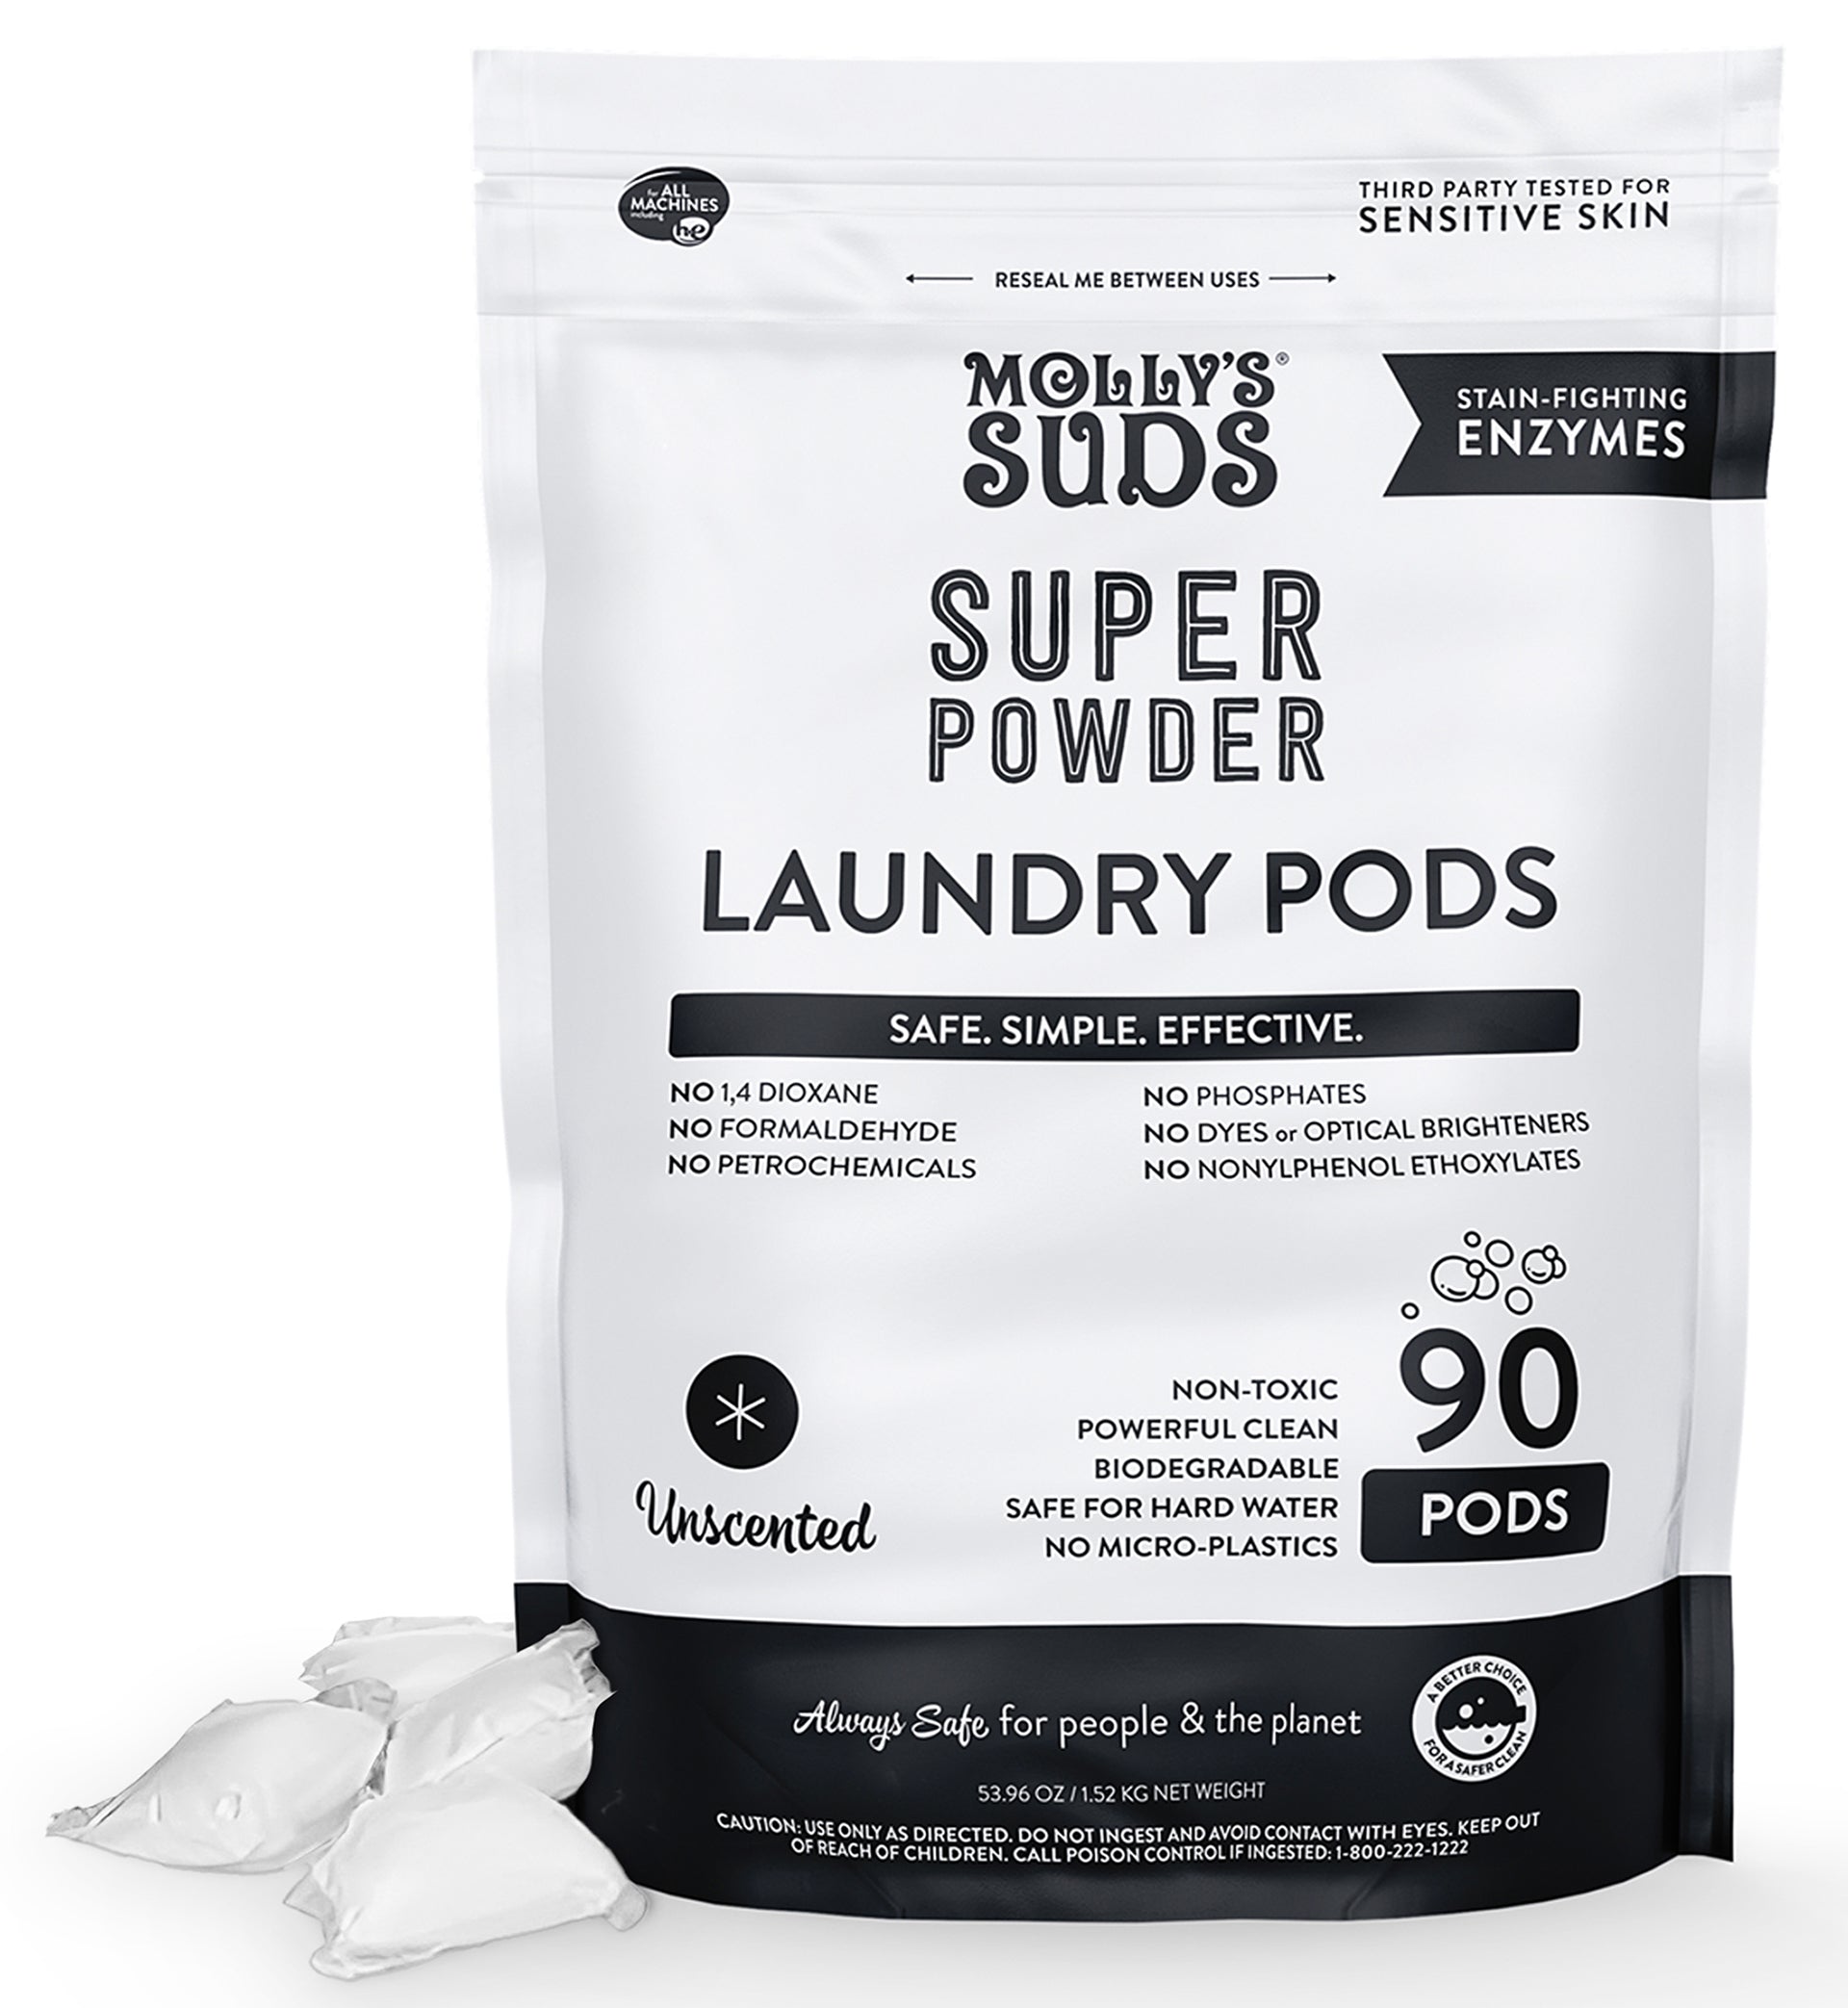 Molly Suds 29.63 oz Ultra Concentrated Laundry Detergent Pods - Unscented - 60 Count | KHCH02201148